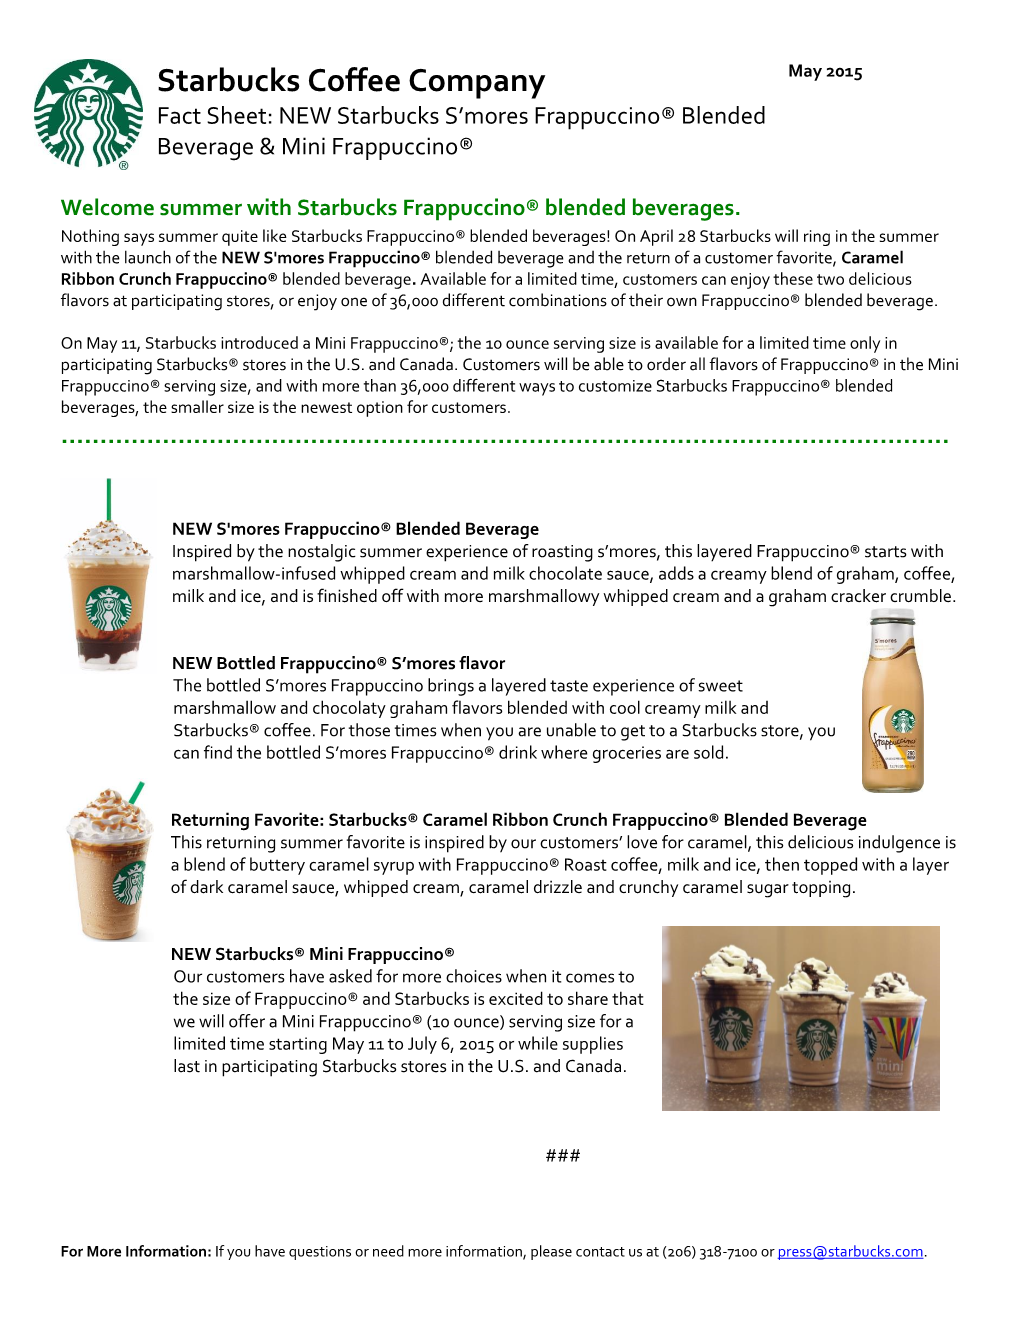 Starbucks Coffee Company May 2015 Fact Sheet: NEW Starbucks S’Mores Frappuccino® Blended Beverage & Mini Frappuccino®